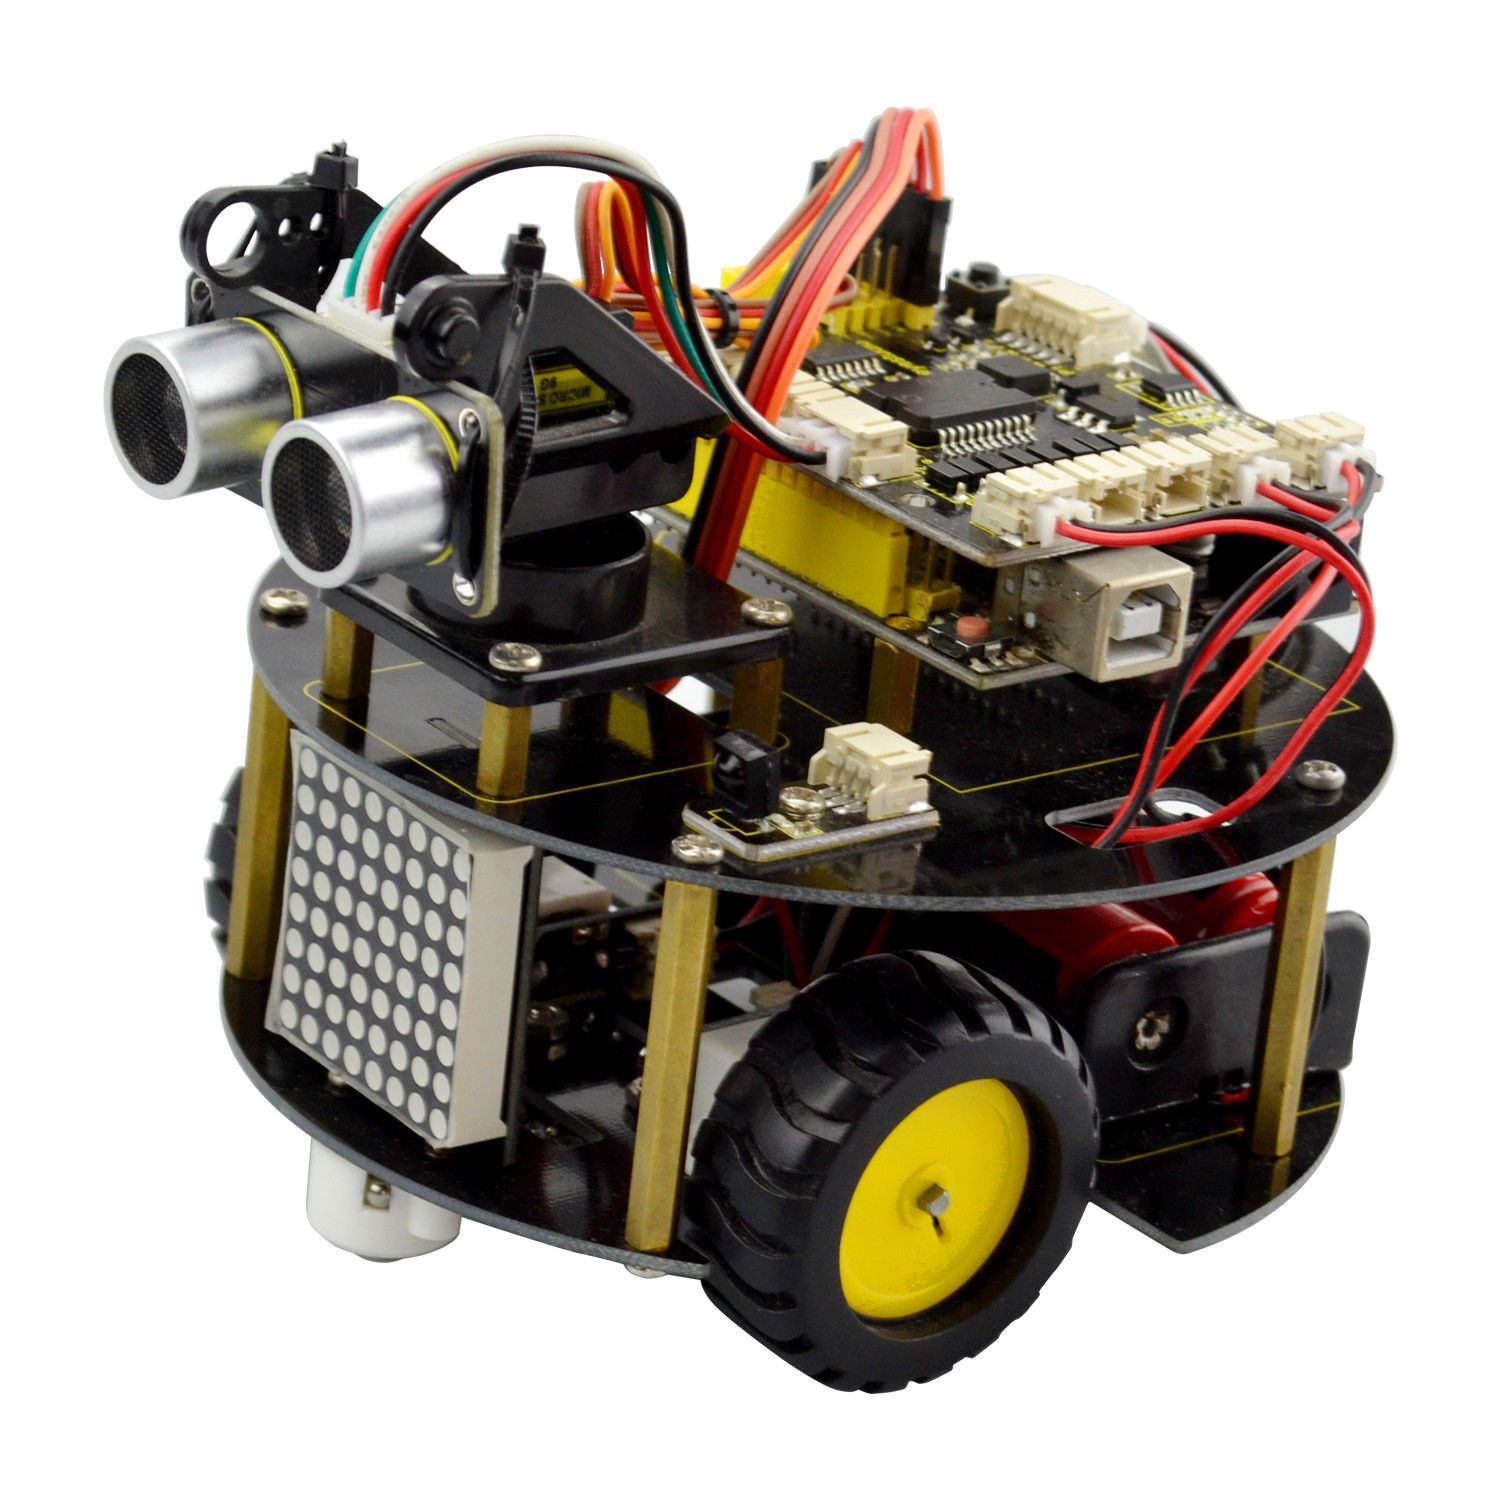 Smart Turtle Robot - Electronic Prototyping Platform - Bluetooth Control & Infrared Remote Control - Both Arduino & Mixly Block Coding - Automatic Obstacles Avoidance - Easy to Use, Flexible & Conven